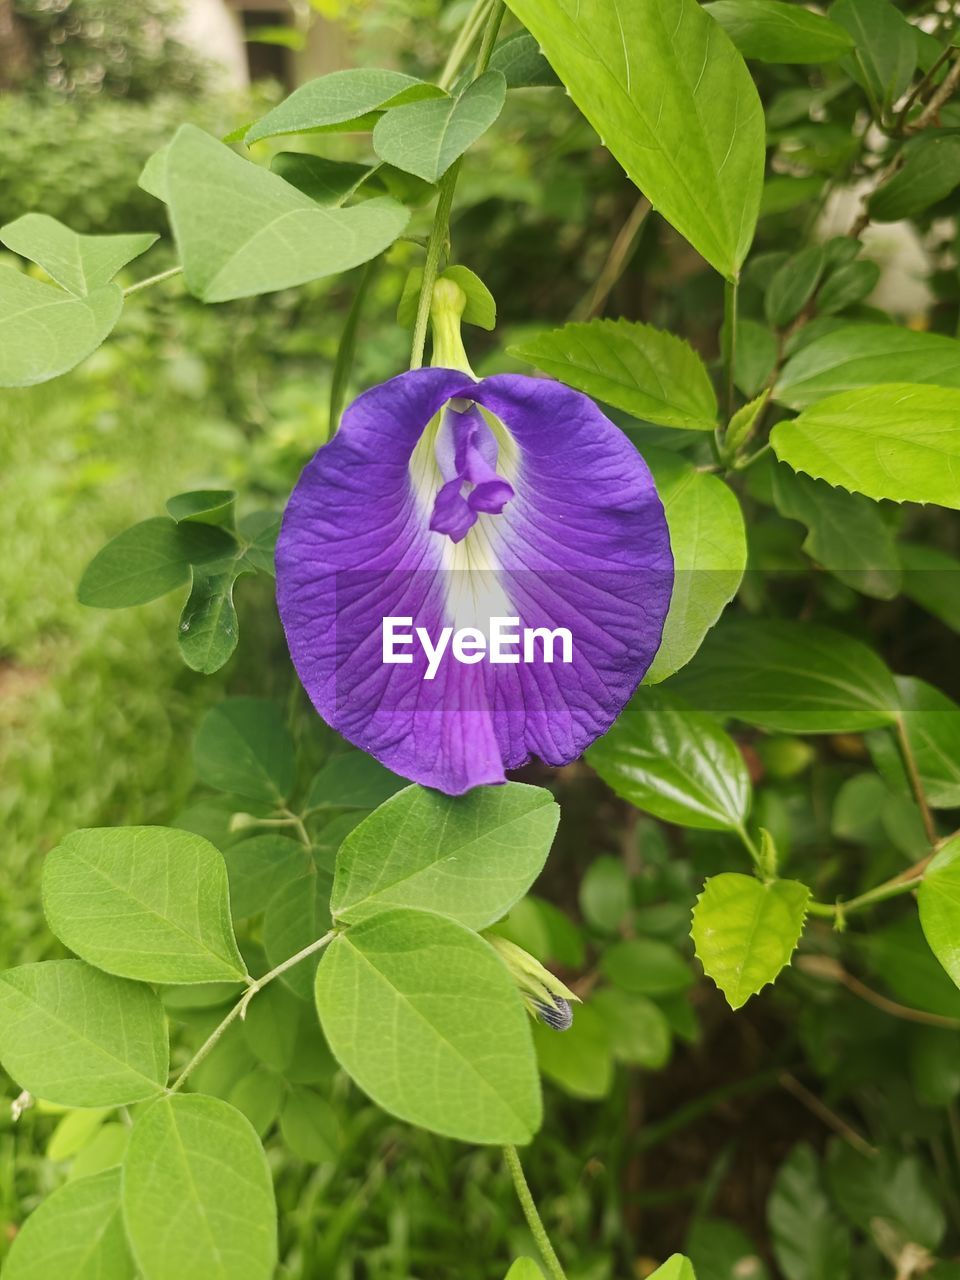 plant, flowering plant, flower, plant part, leaf, freshness, beauty in nature, growth, purple, petal, flower head, inflorescence, fragility, close-up, nature, green, no people, springtime, botany, outdoors, blossom, wildflower, day, focus on foreground